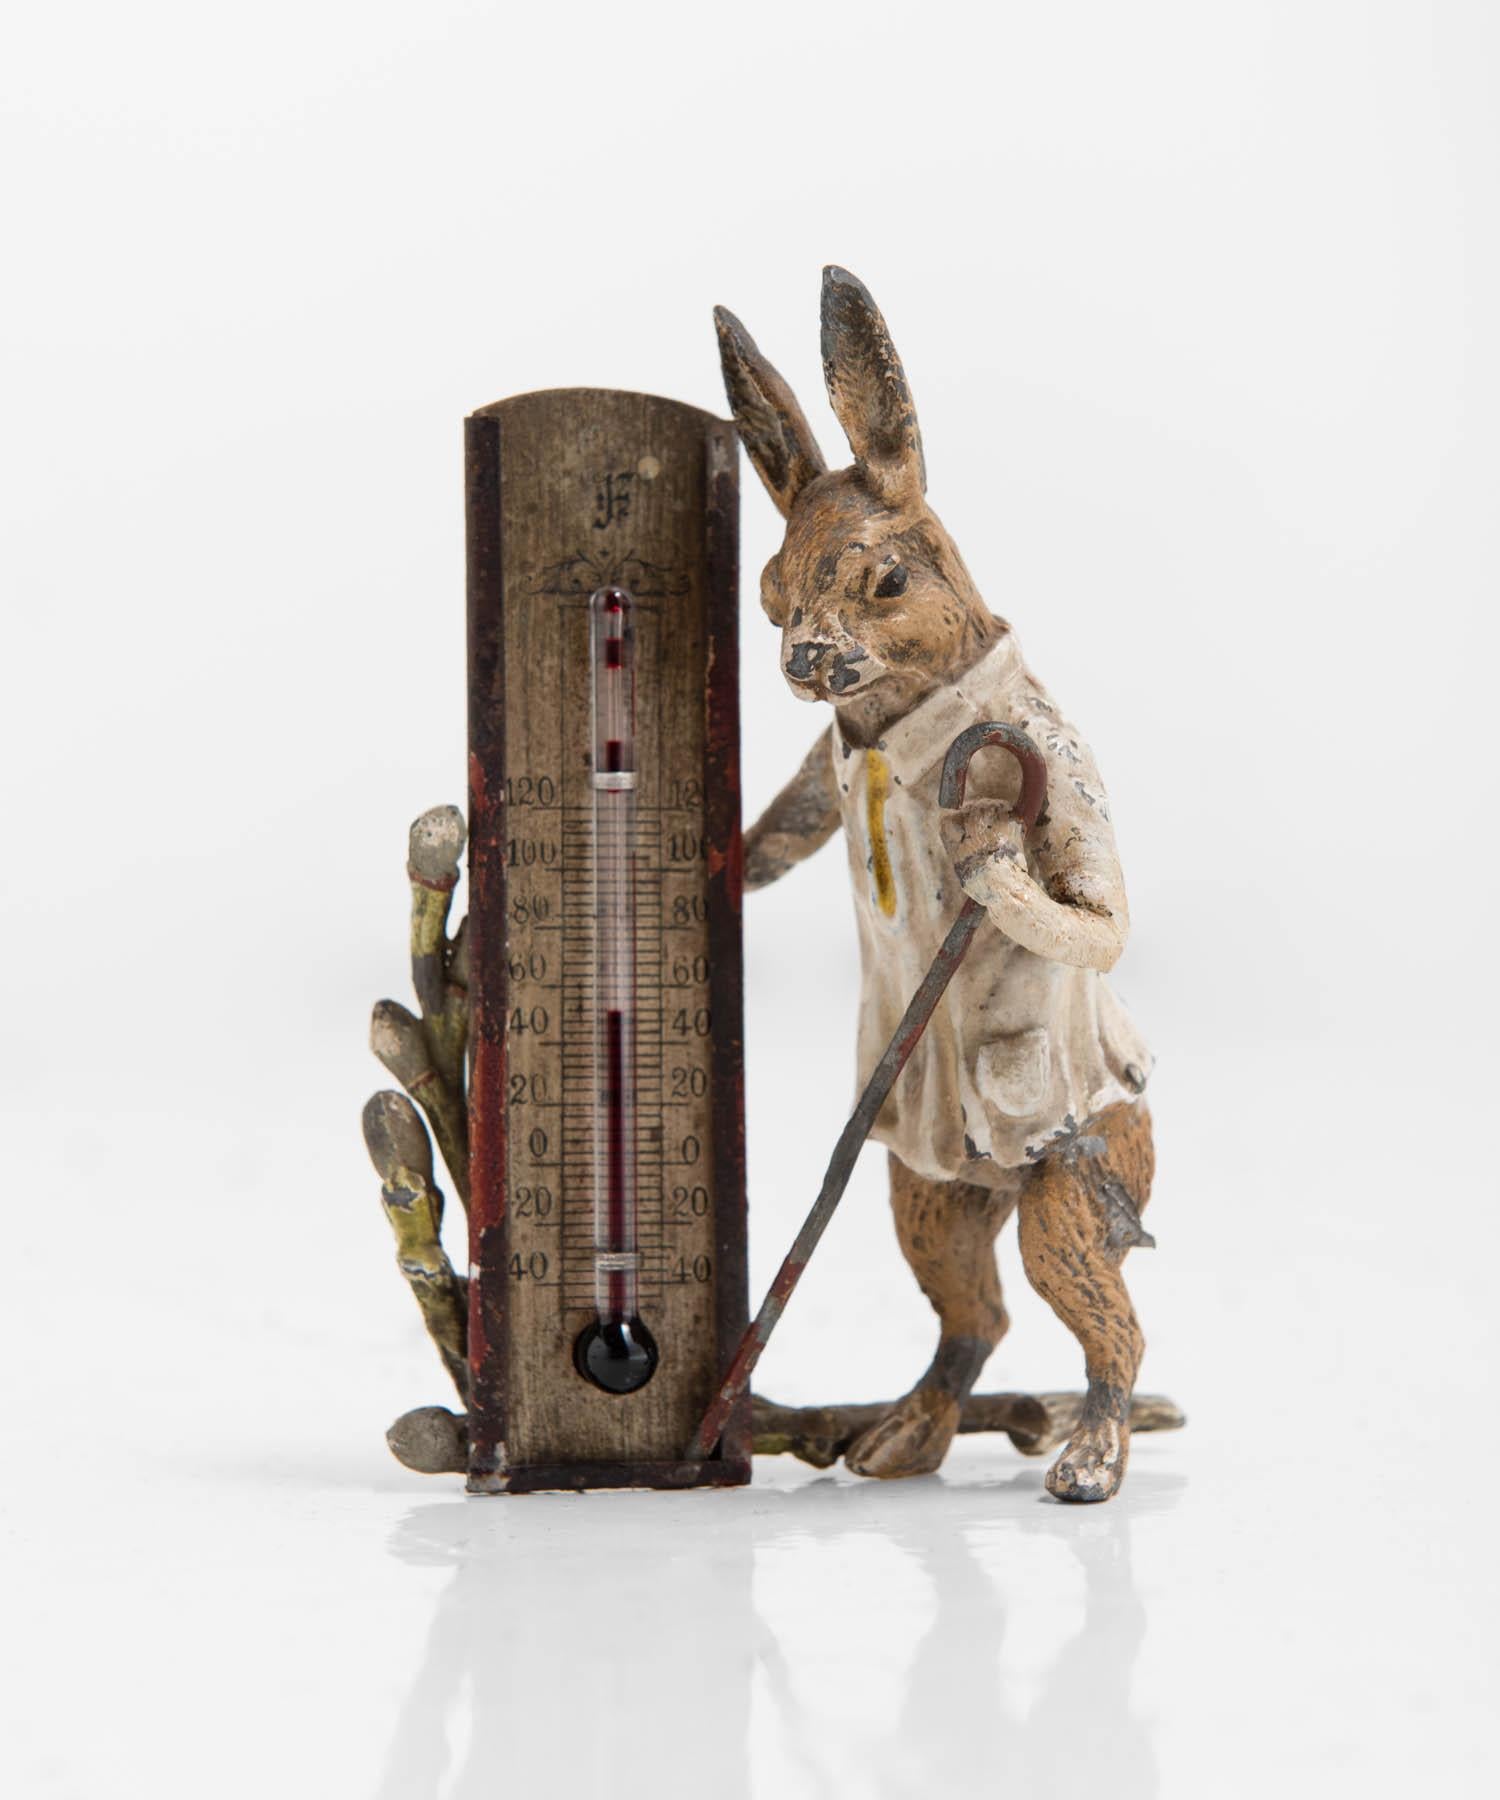 The March Hare barometer, Austria, 19th century.

Cast metal cold painted Austrian Hare with functional barometer.